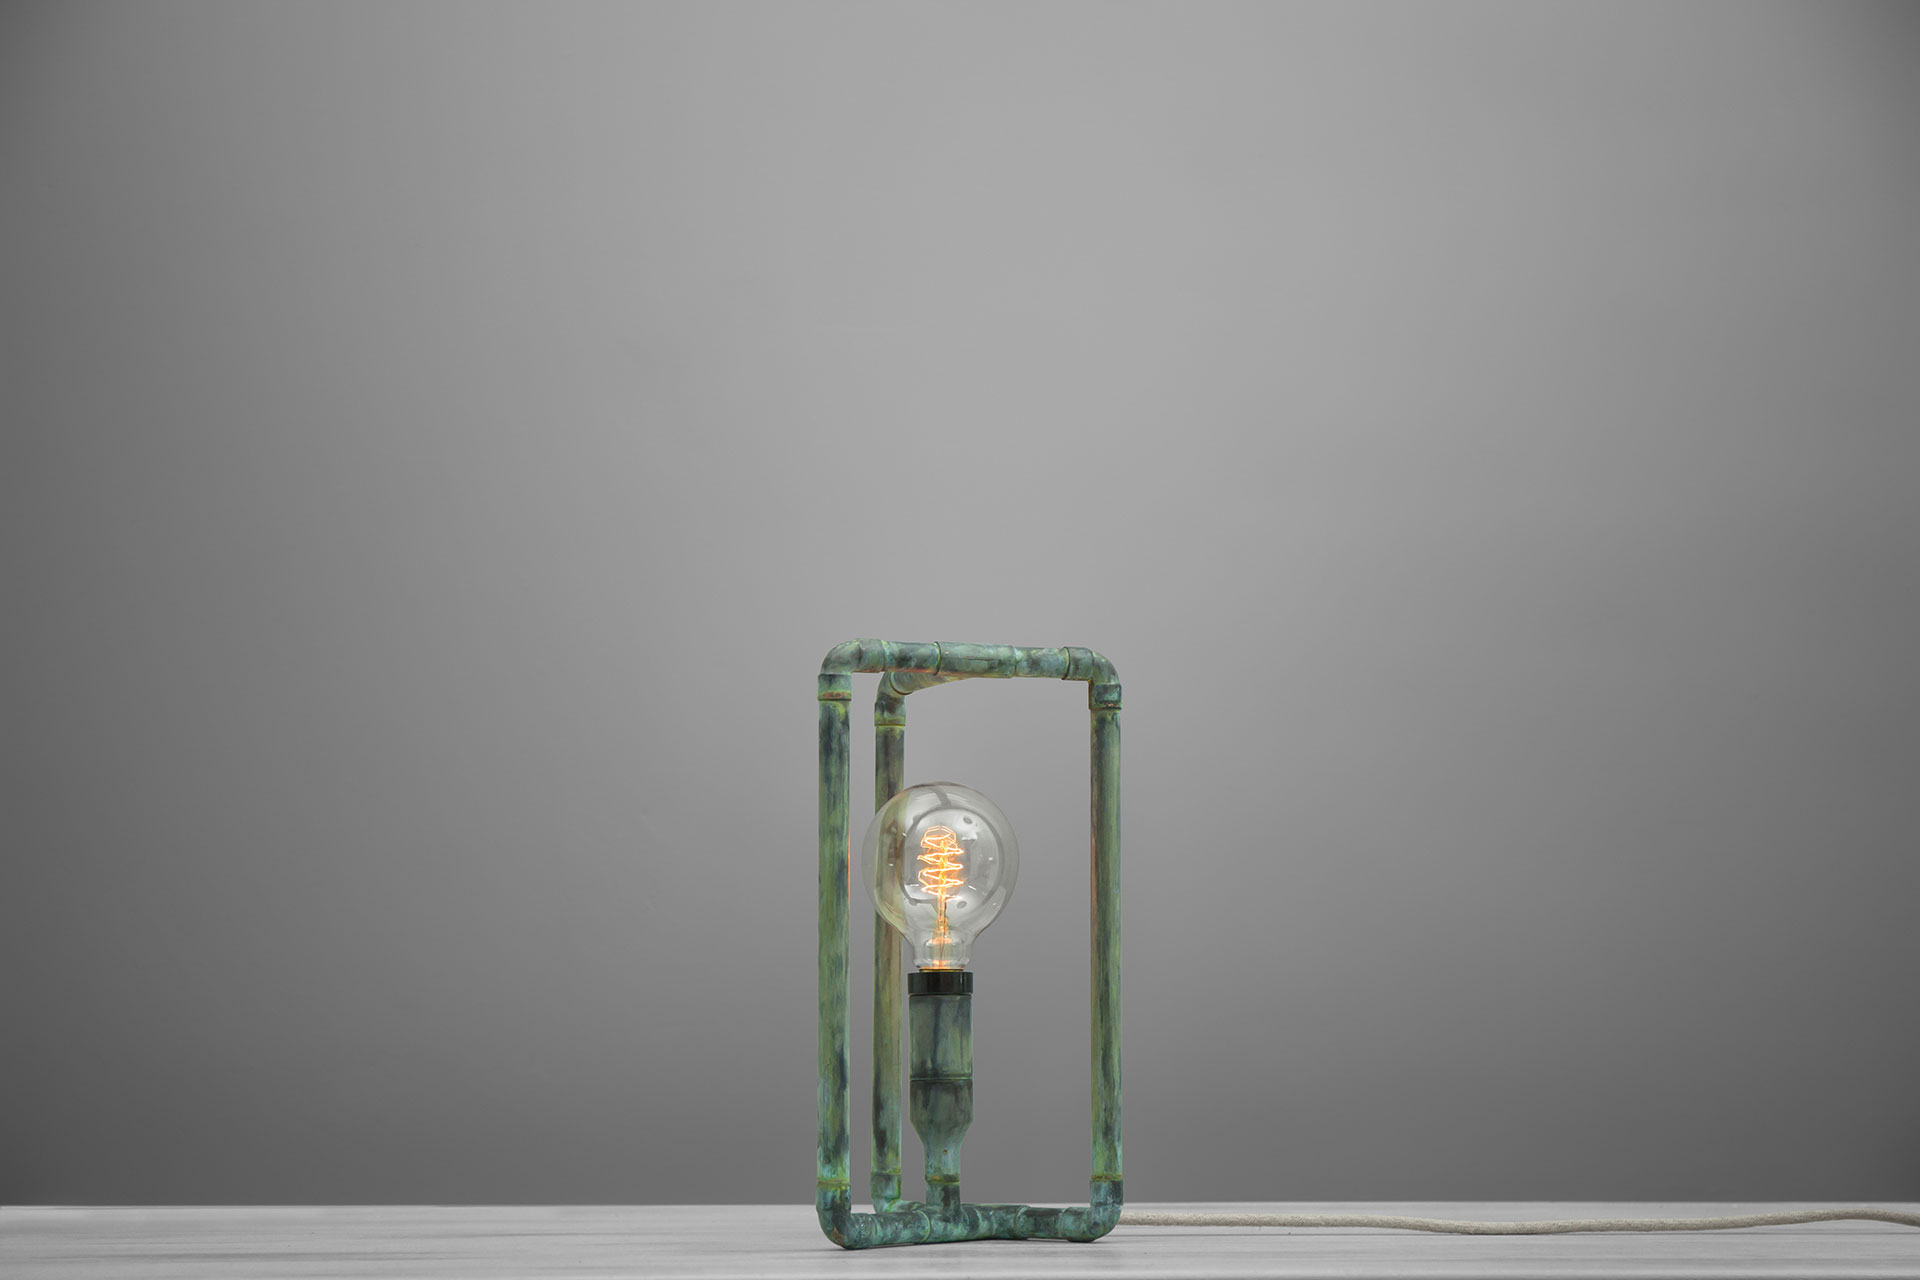 Loft style desk lamp in natural green patina with creative touch dimmer and vintage Edison bulb